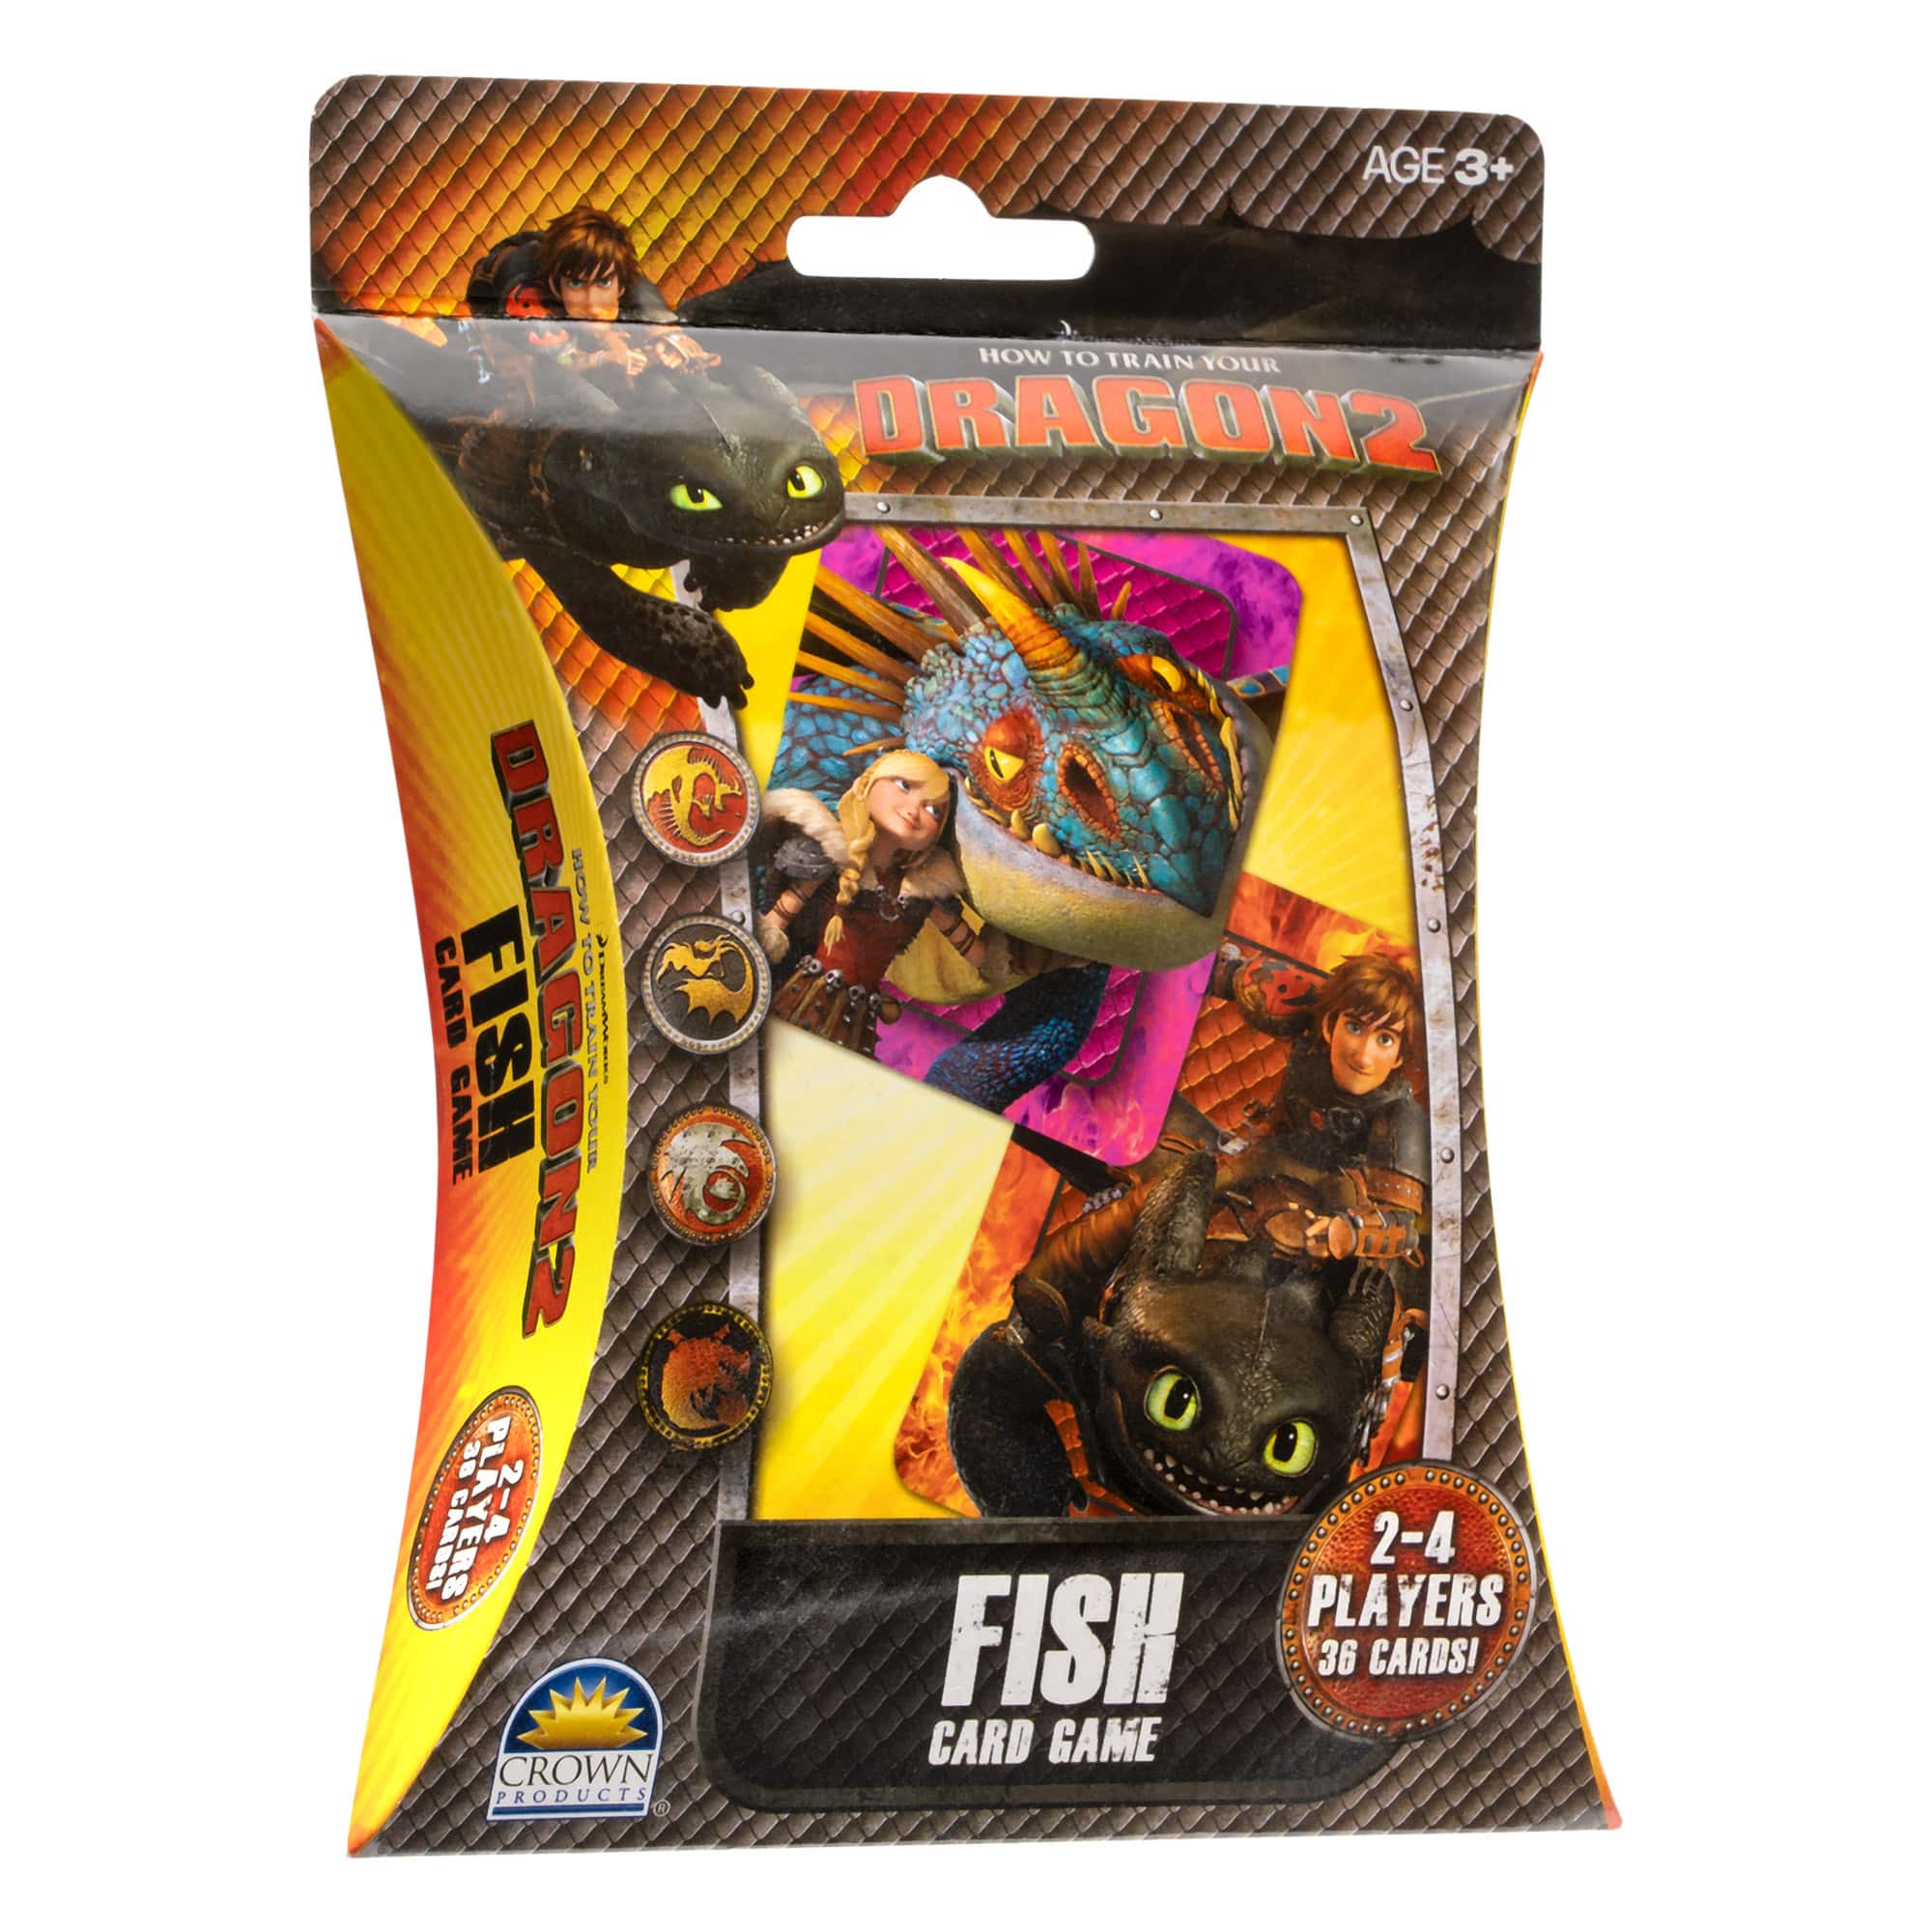 How To Train Your Dragon 2 - Fish Card Game